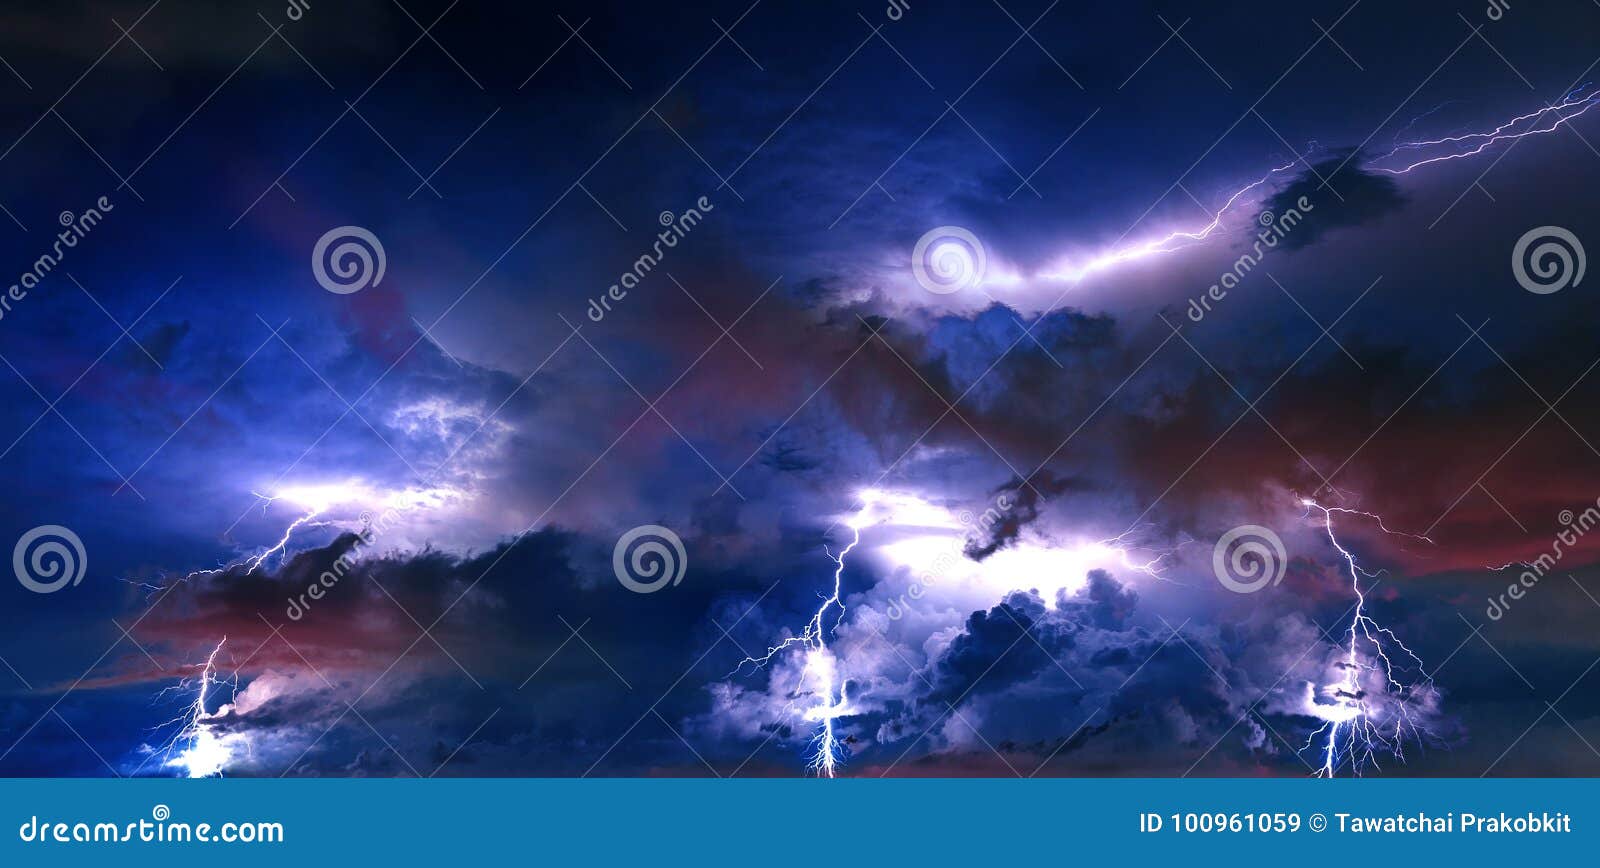 Thunderstorm Clouds